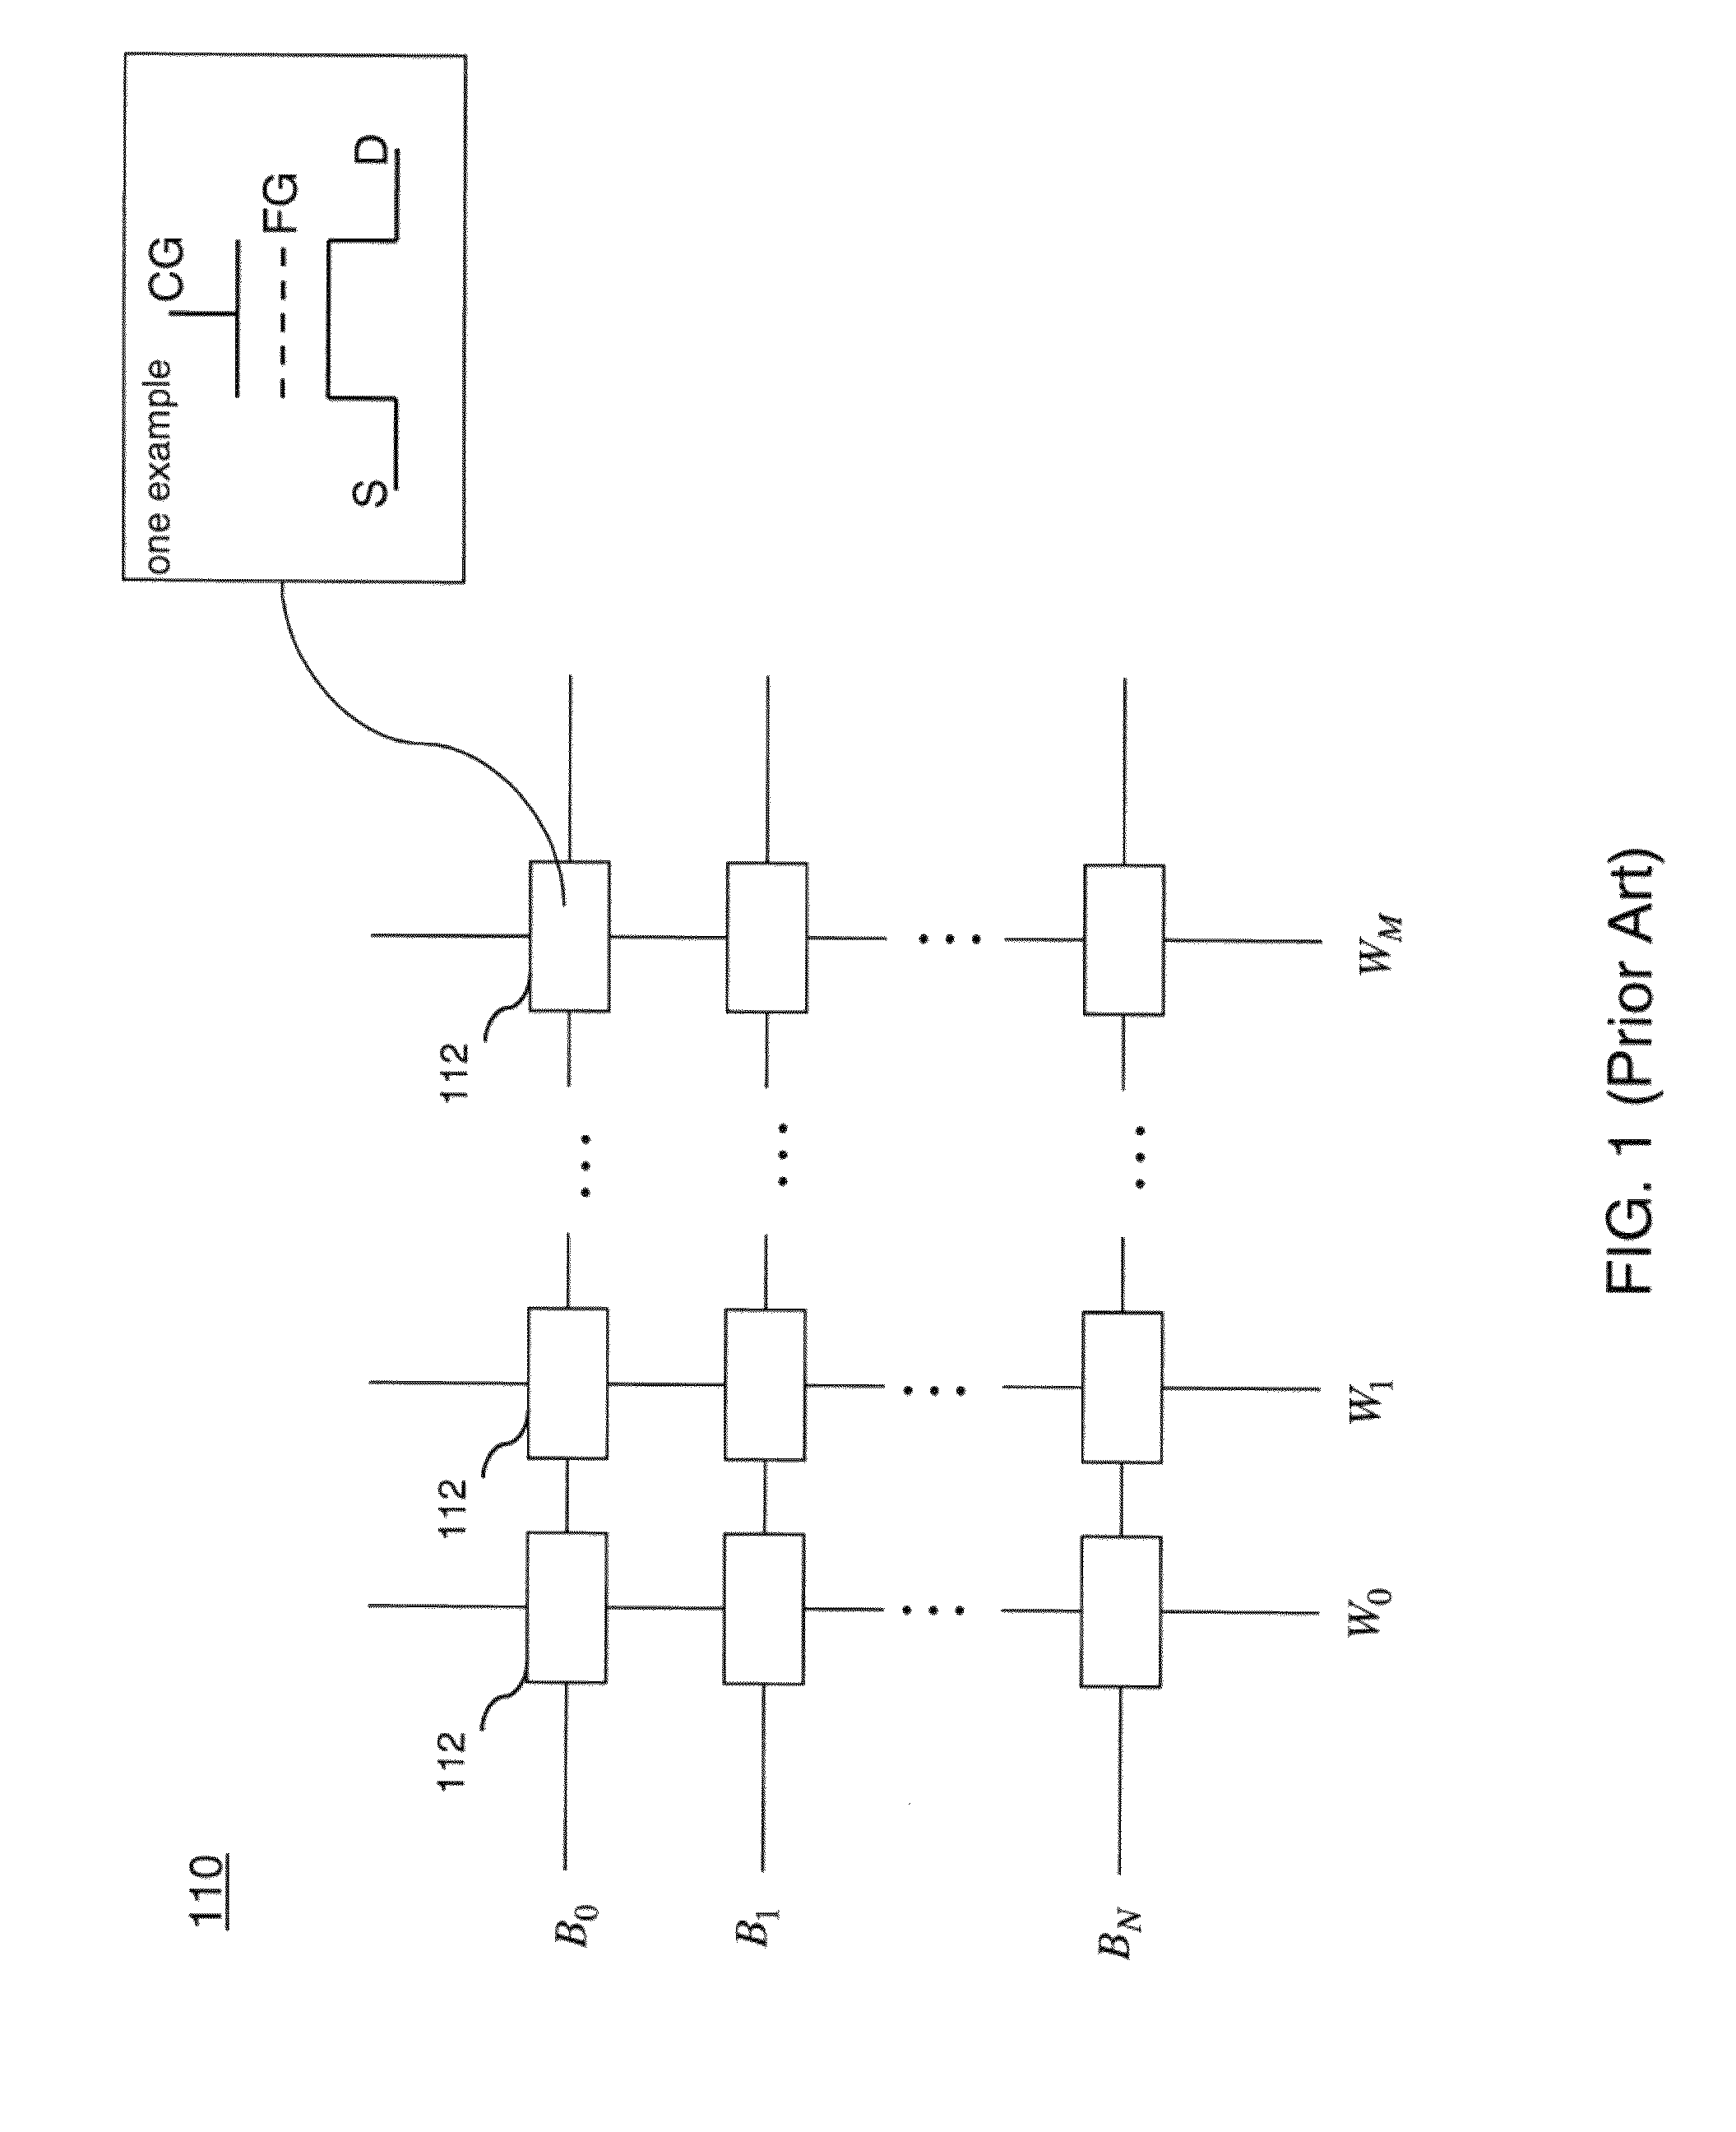 Storage devices with soft processing